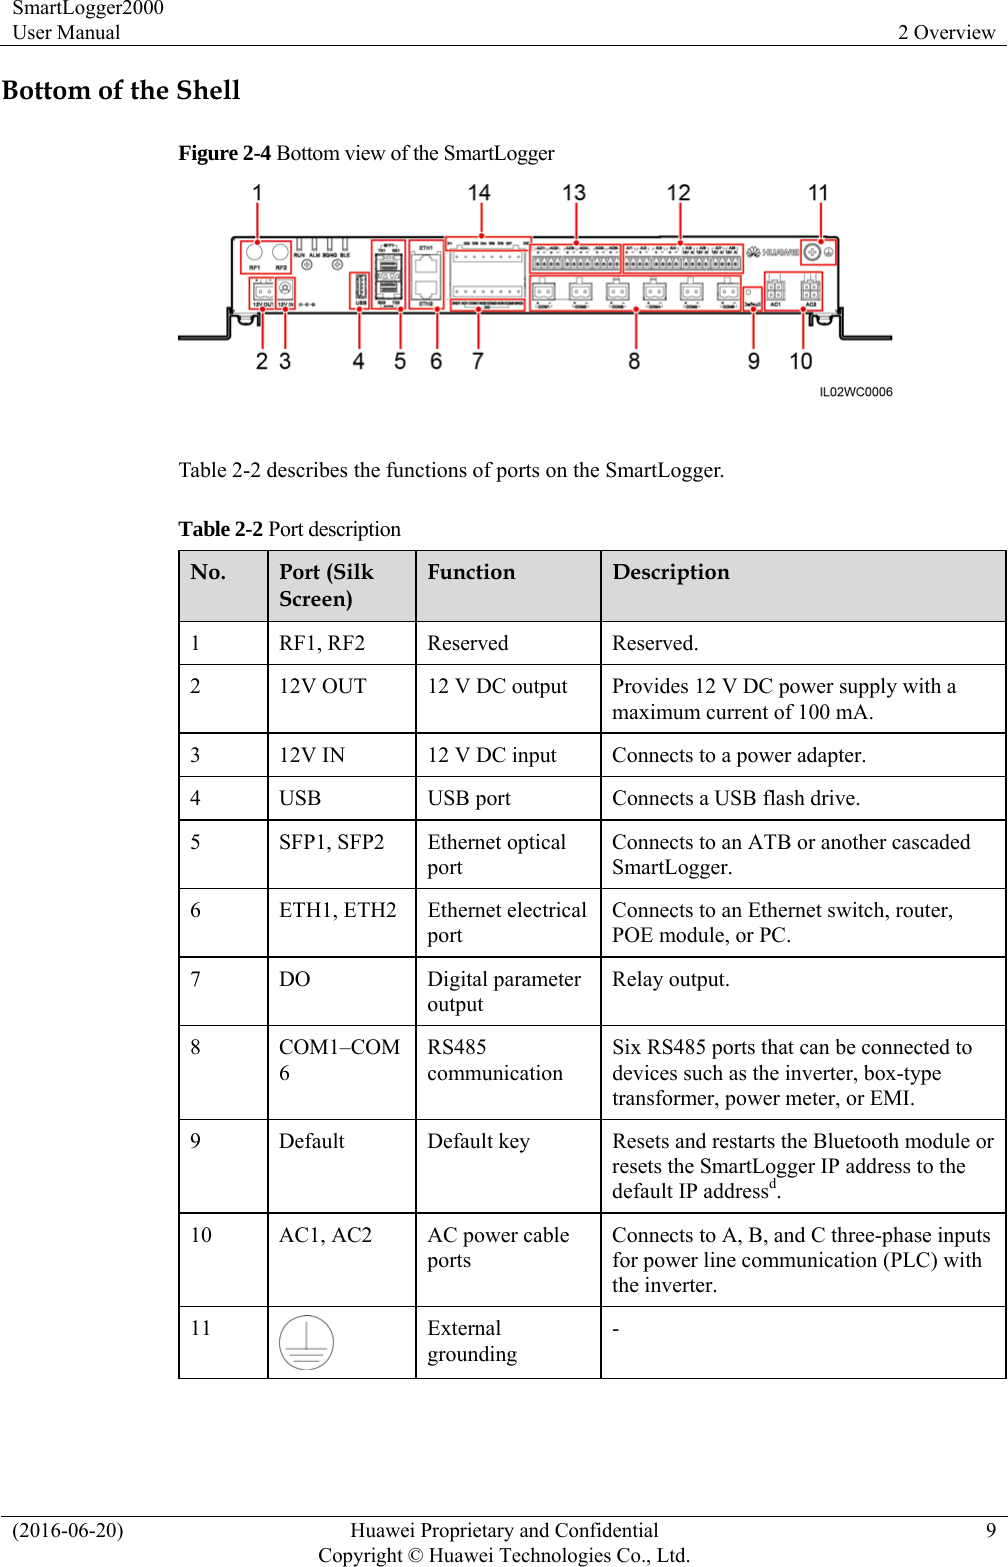 SmartLogger2000 User Manual  2 Overview (2016-06-20)  Huawei Proprietary and Confidential         Copyright © Huawei Technologies Co., Ltd.9 Bottom of the Shell Figure 2-4 Bottom view of the SmartLogger   Table 2-2 describes the functions of ports on the SmartLogger.   Table 2-2 Port description No.  Port (Silk Screen) Function  Description 1 RF1, RF2 Reserved  Reserved. 2  12V OUT  12 V DC output  Provides 12 V DC power supply with a maximum current of 100 mA.   3  12V IN  12 V DC input  Connects to a power adapter.   4  USB  USB port  Connects a USB flash drive. 5  SFP1, SFP2  Ethernet optical port Connects to an ATB or another cascaded SmartLogger. 6  ETH1, ETH2 Ethernet electrical port Connects to an Ethernet switch, router, POE module, or PC.   7 DO  Digital parameter output Relay output. 8 COM1–COM6 RS485 communication Six RS485 ports that can be connected to devices such as the inverter, box-type transformer, power meter, or EMI.   9  Default  Default key  Resets and restarts the Bluetooth module or resets the SmartLogger IP address to the default IP addressd.  10  AC1, AC2  AC power cable ports Connects to A, B, and C three-phase inputs for power line communication (PLC) with the inverter.   11  External grounding - 